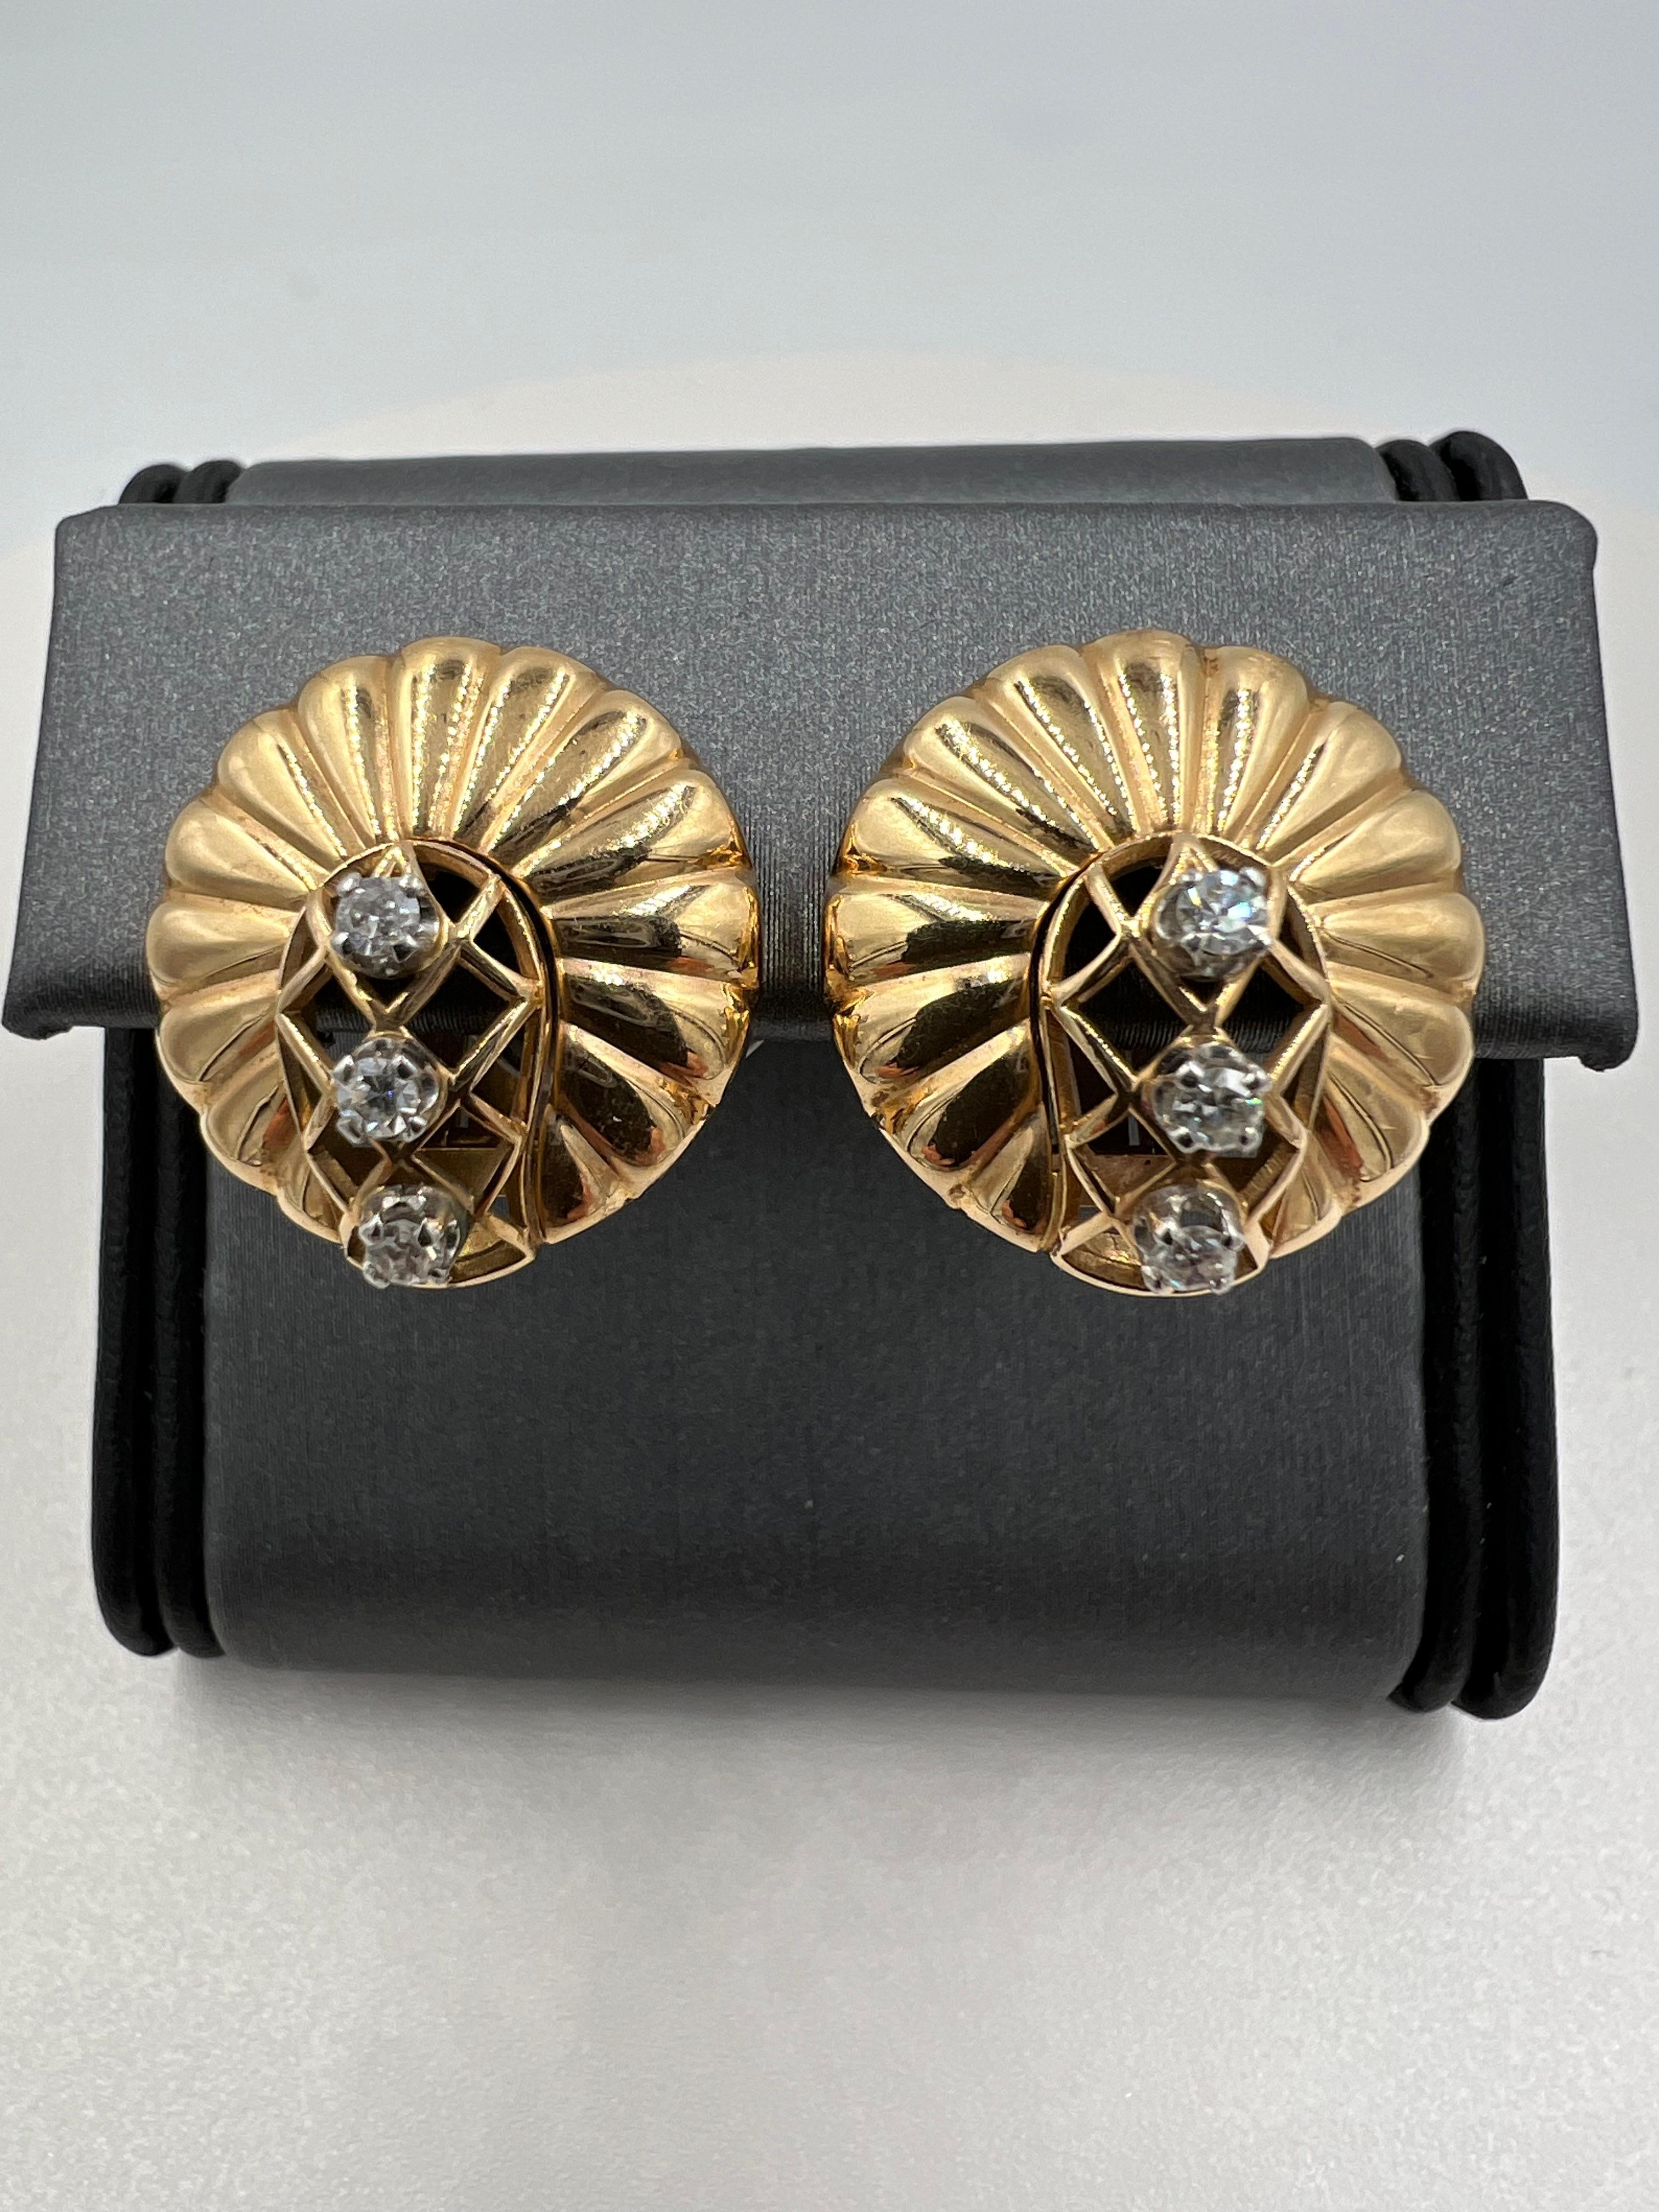 
Retro diamond gold clip on earrings, circa 1950s

The 1950s was a decade known for its glamorous and elegant fashion, and the retro diamond gold clip-on earrings were a perfect representation of this era. These stunning accessories were a must-have